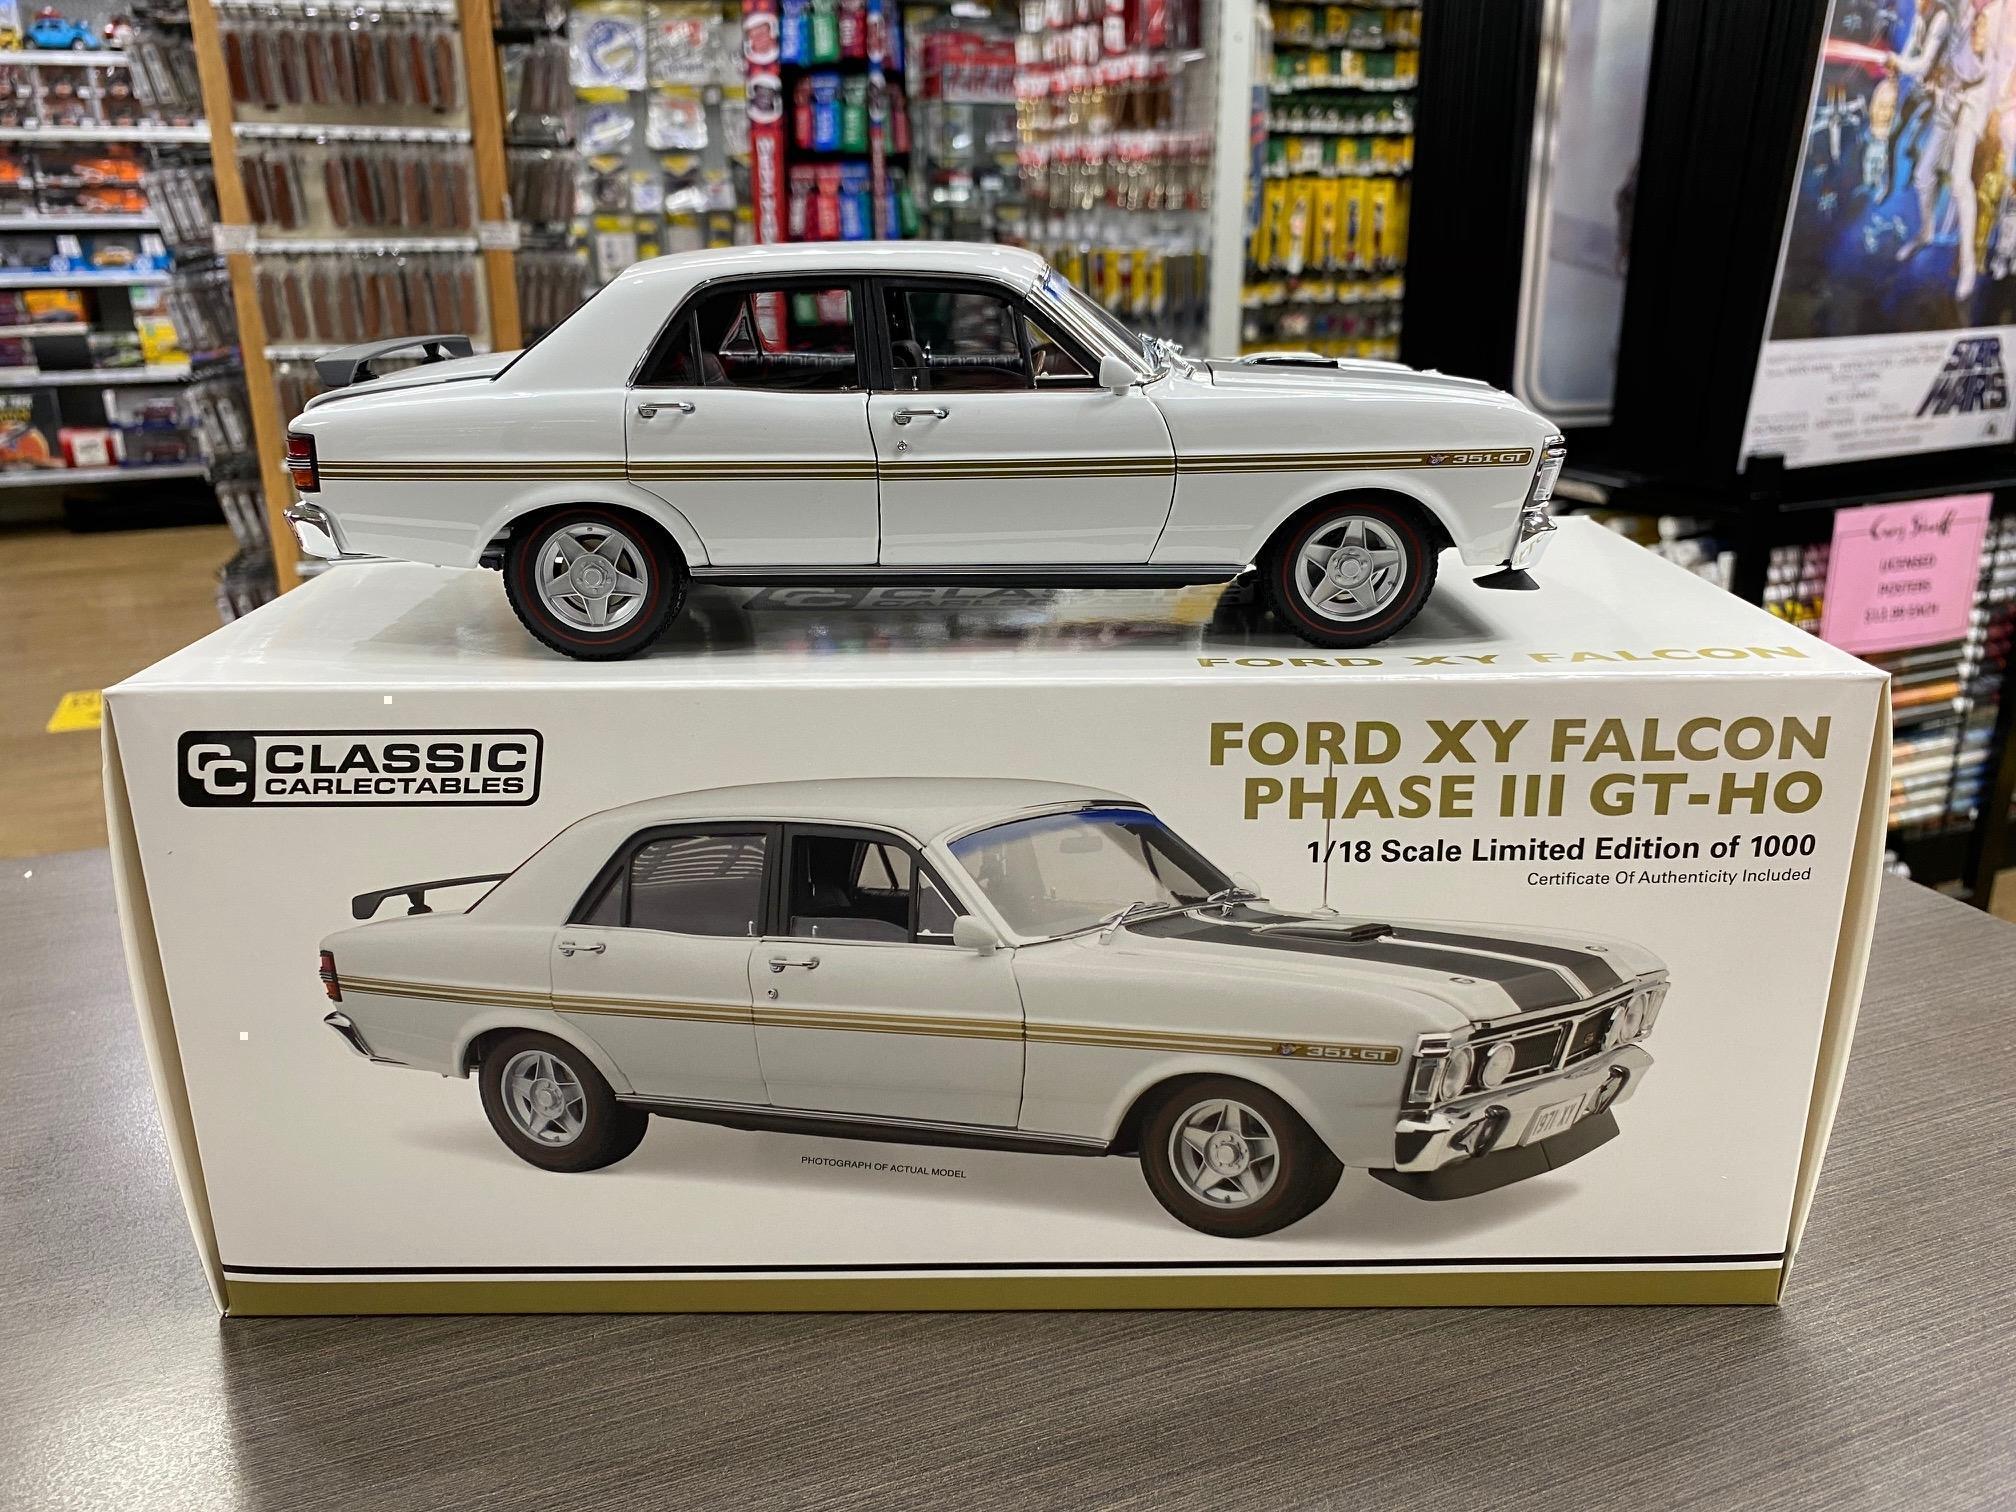 Ford XY Falcon Phase III GT-HO Ultra White 1:18 Scale Model Car